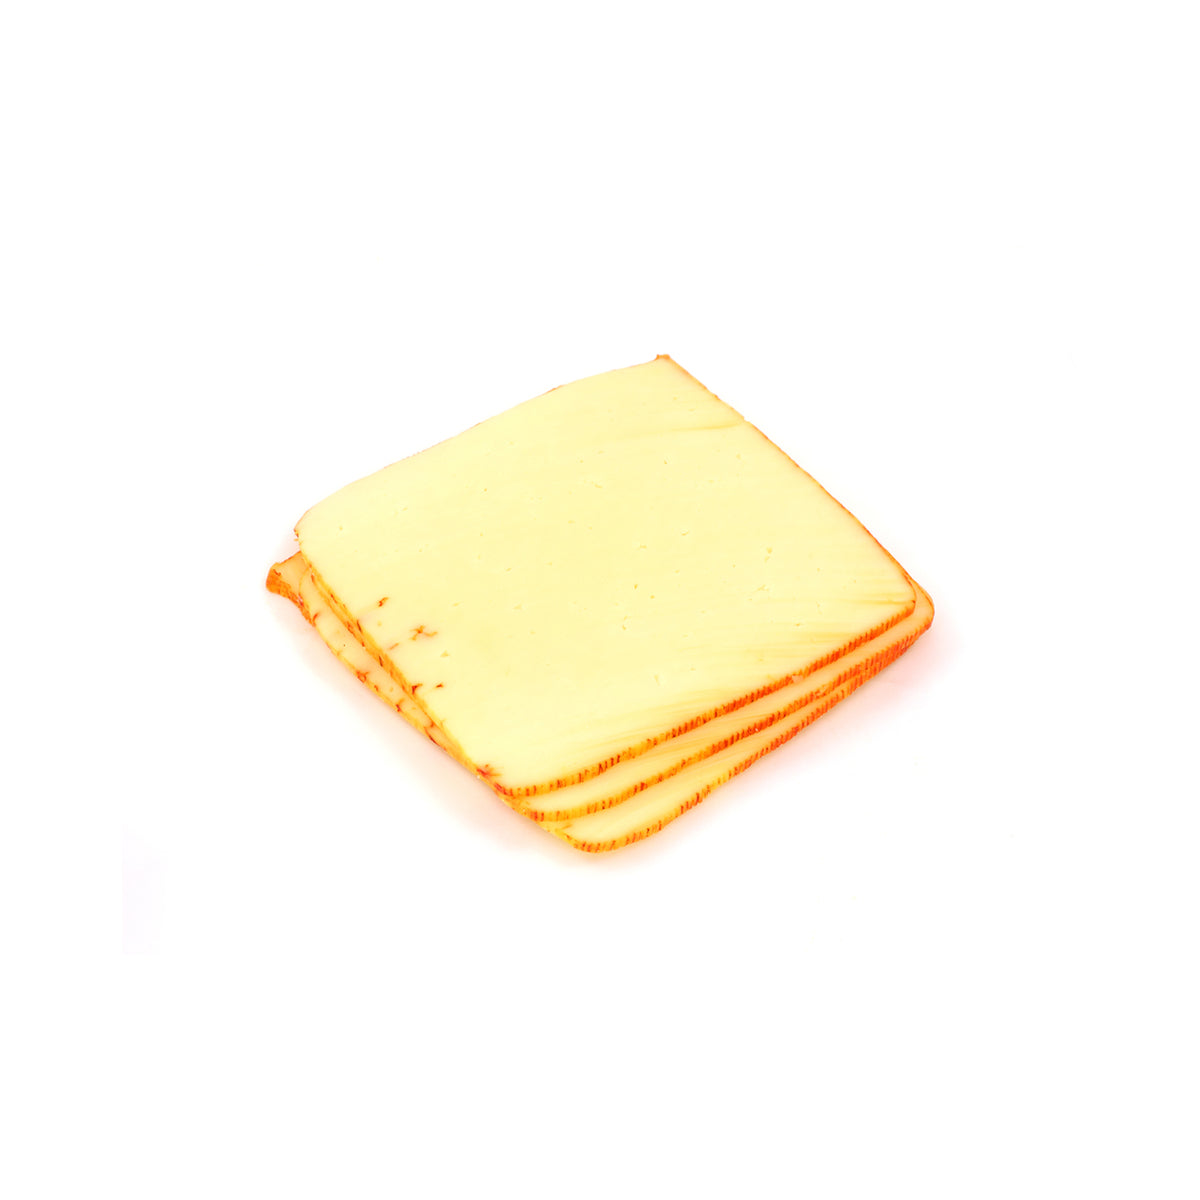 Emmi Roth Sliced Muenster Cheese 2.5 LB